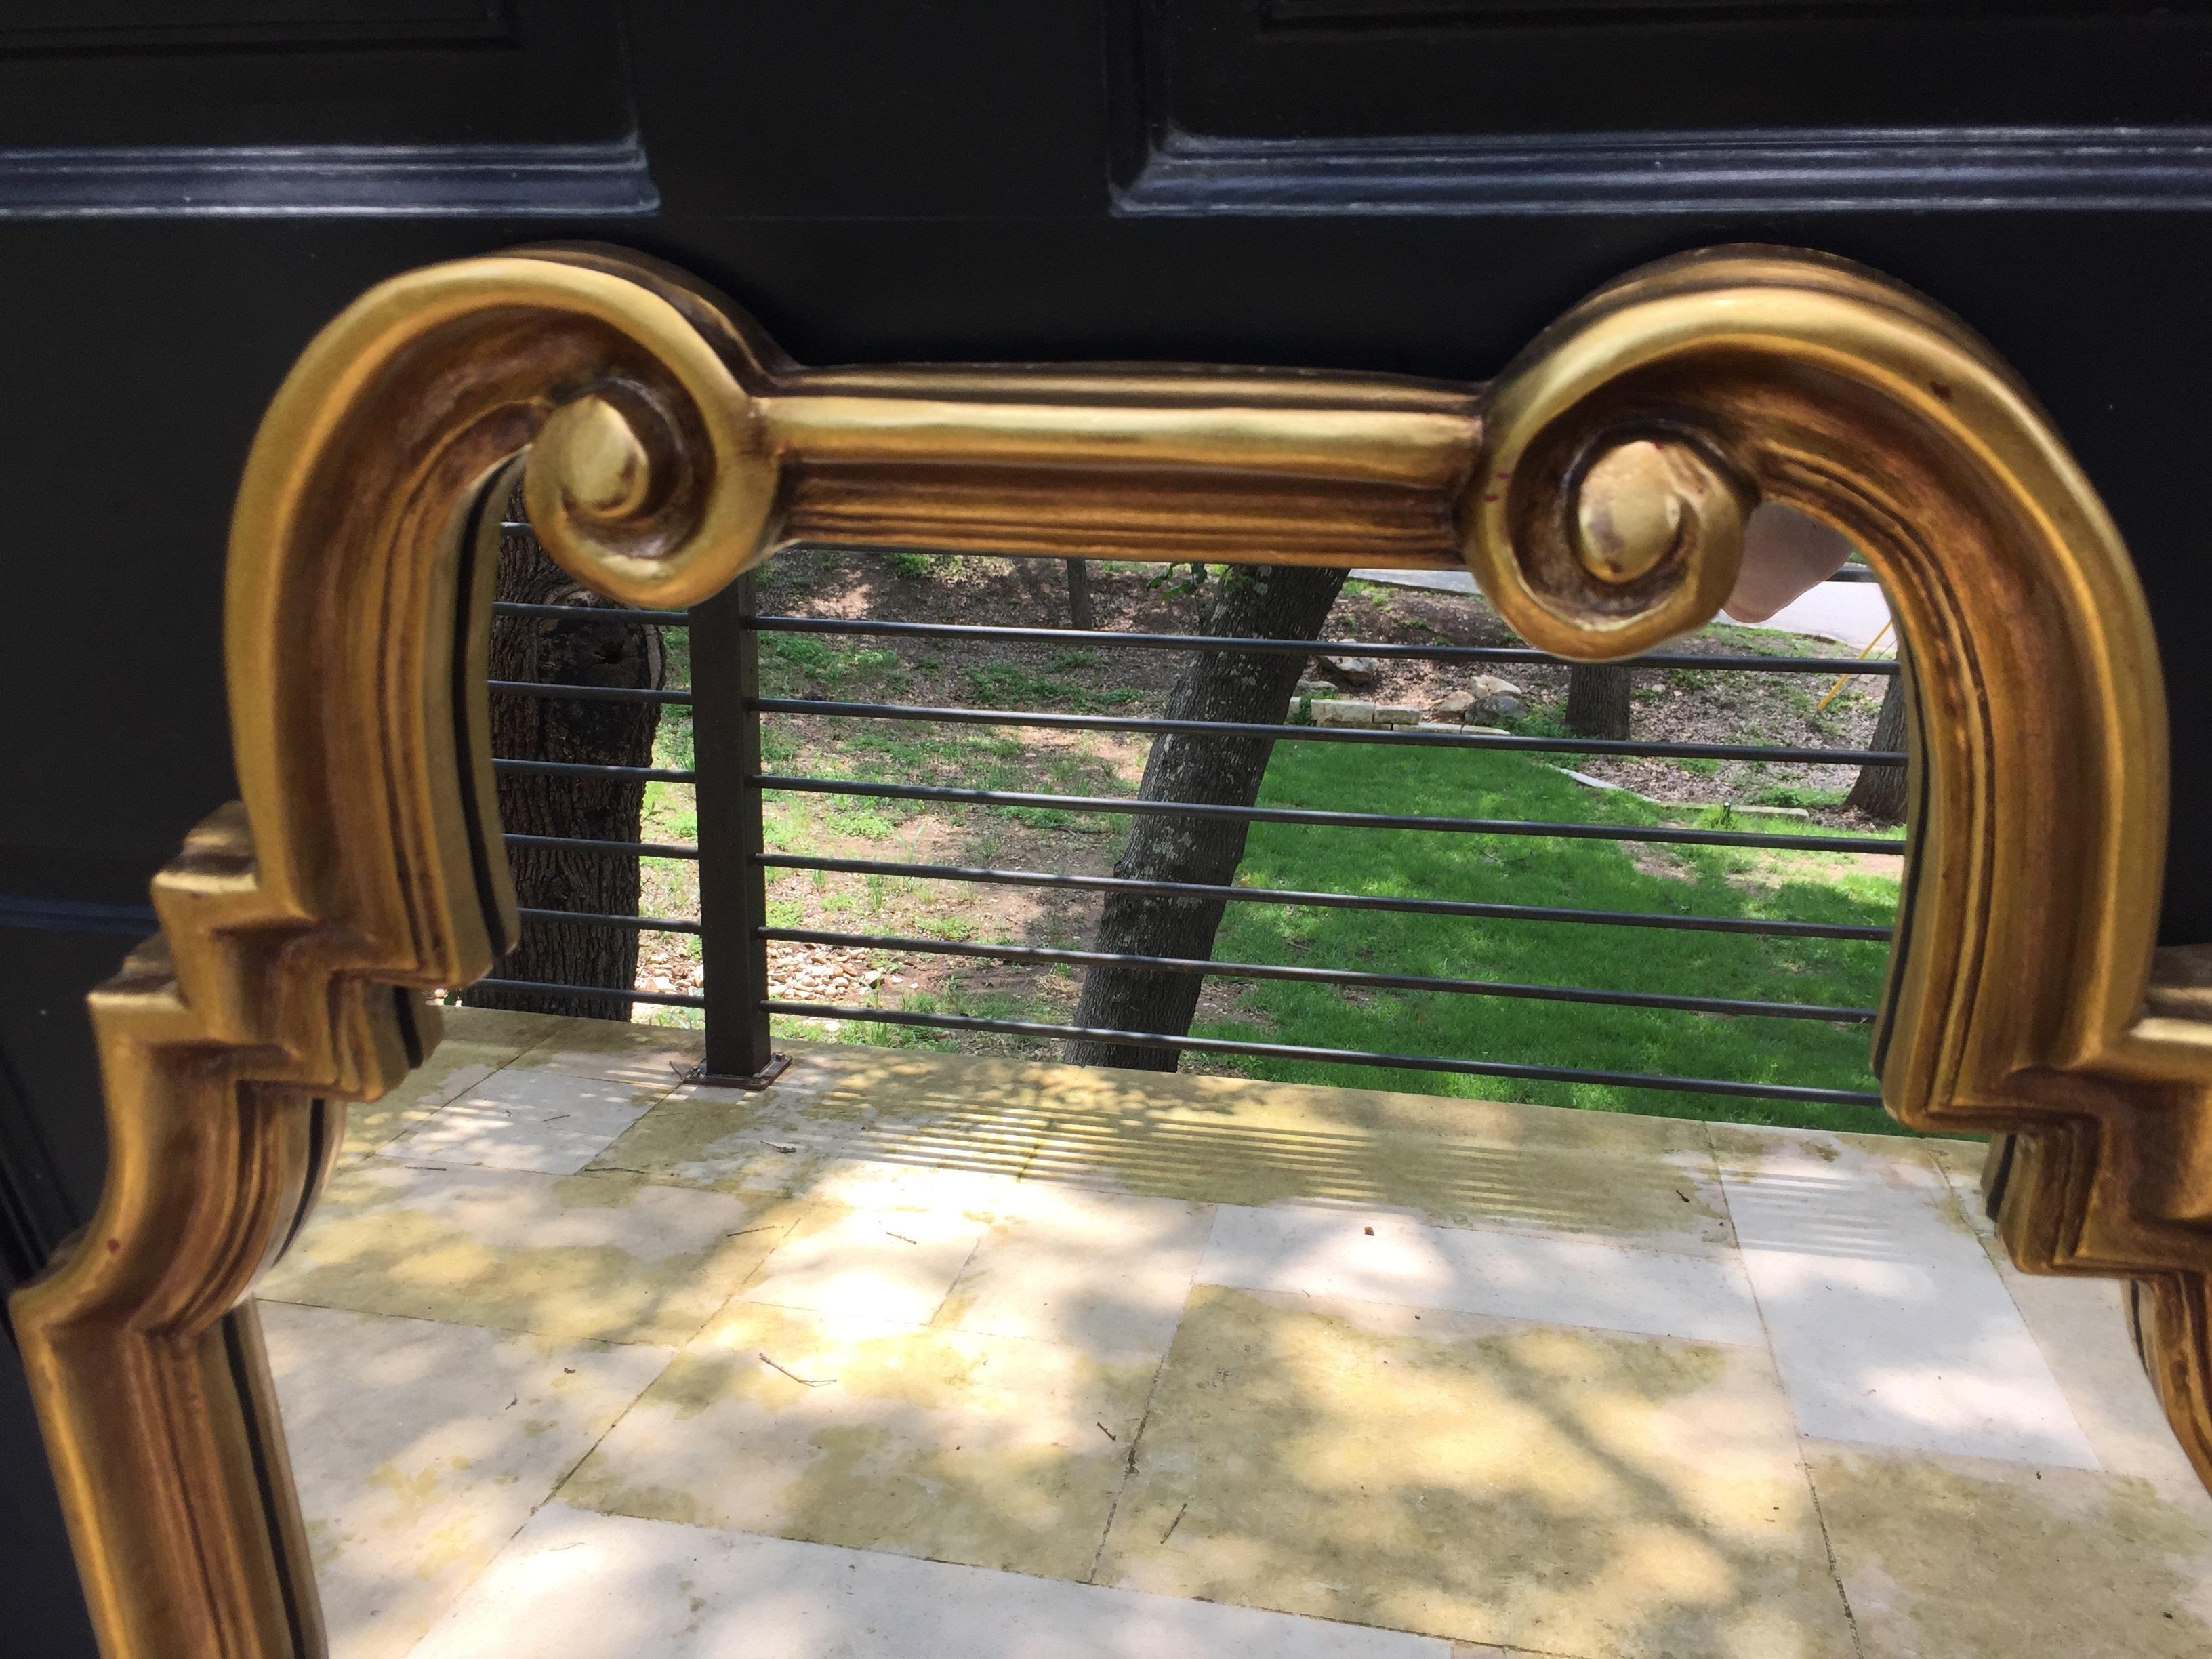 1960s La Barge wooden mirror with a gilt finish. Geometric sides lead to a scrolled top, giving this mirror transitional appeal. French style curved accents at top compliment its contemporary lines. Unmarked.